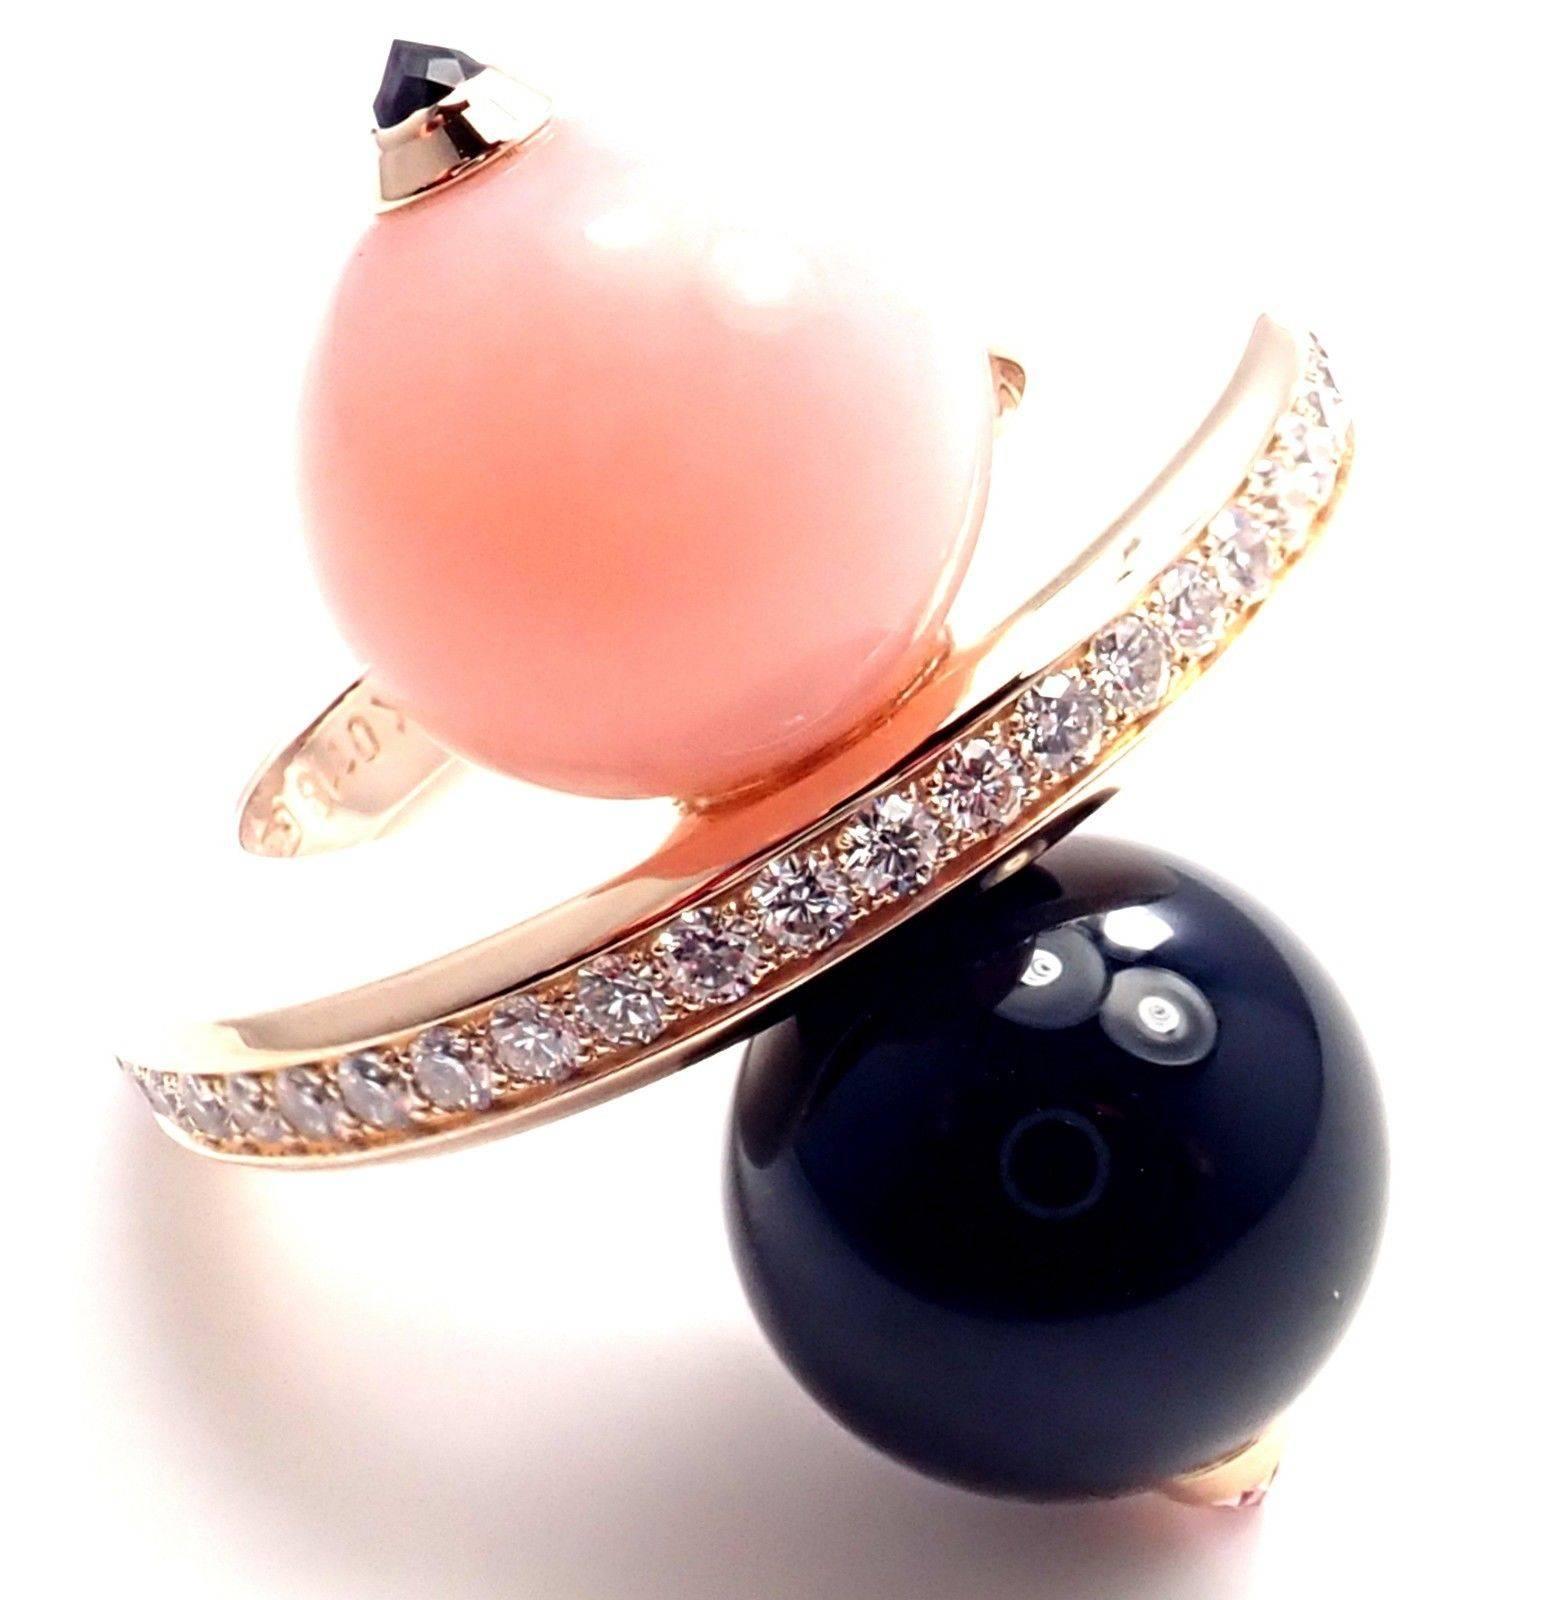 18k Rose Gold Diamond Pink Opal And Black Onyx Beads, Pink Sapphire Évasions Joaillières RIng by Cartier.
With 33 round brilliant cut diamonds VVS1 clarity, E color total weight approx. .66ct
1 pink opal bead 11mm
1 black onyx bead 11mm
Black and